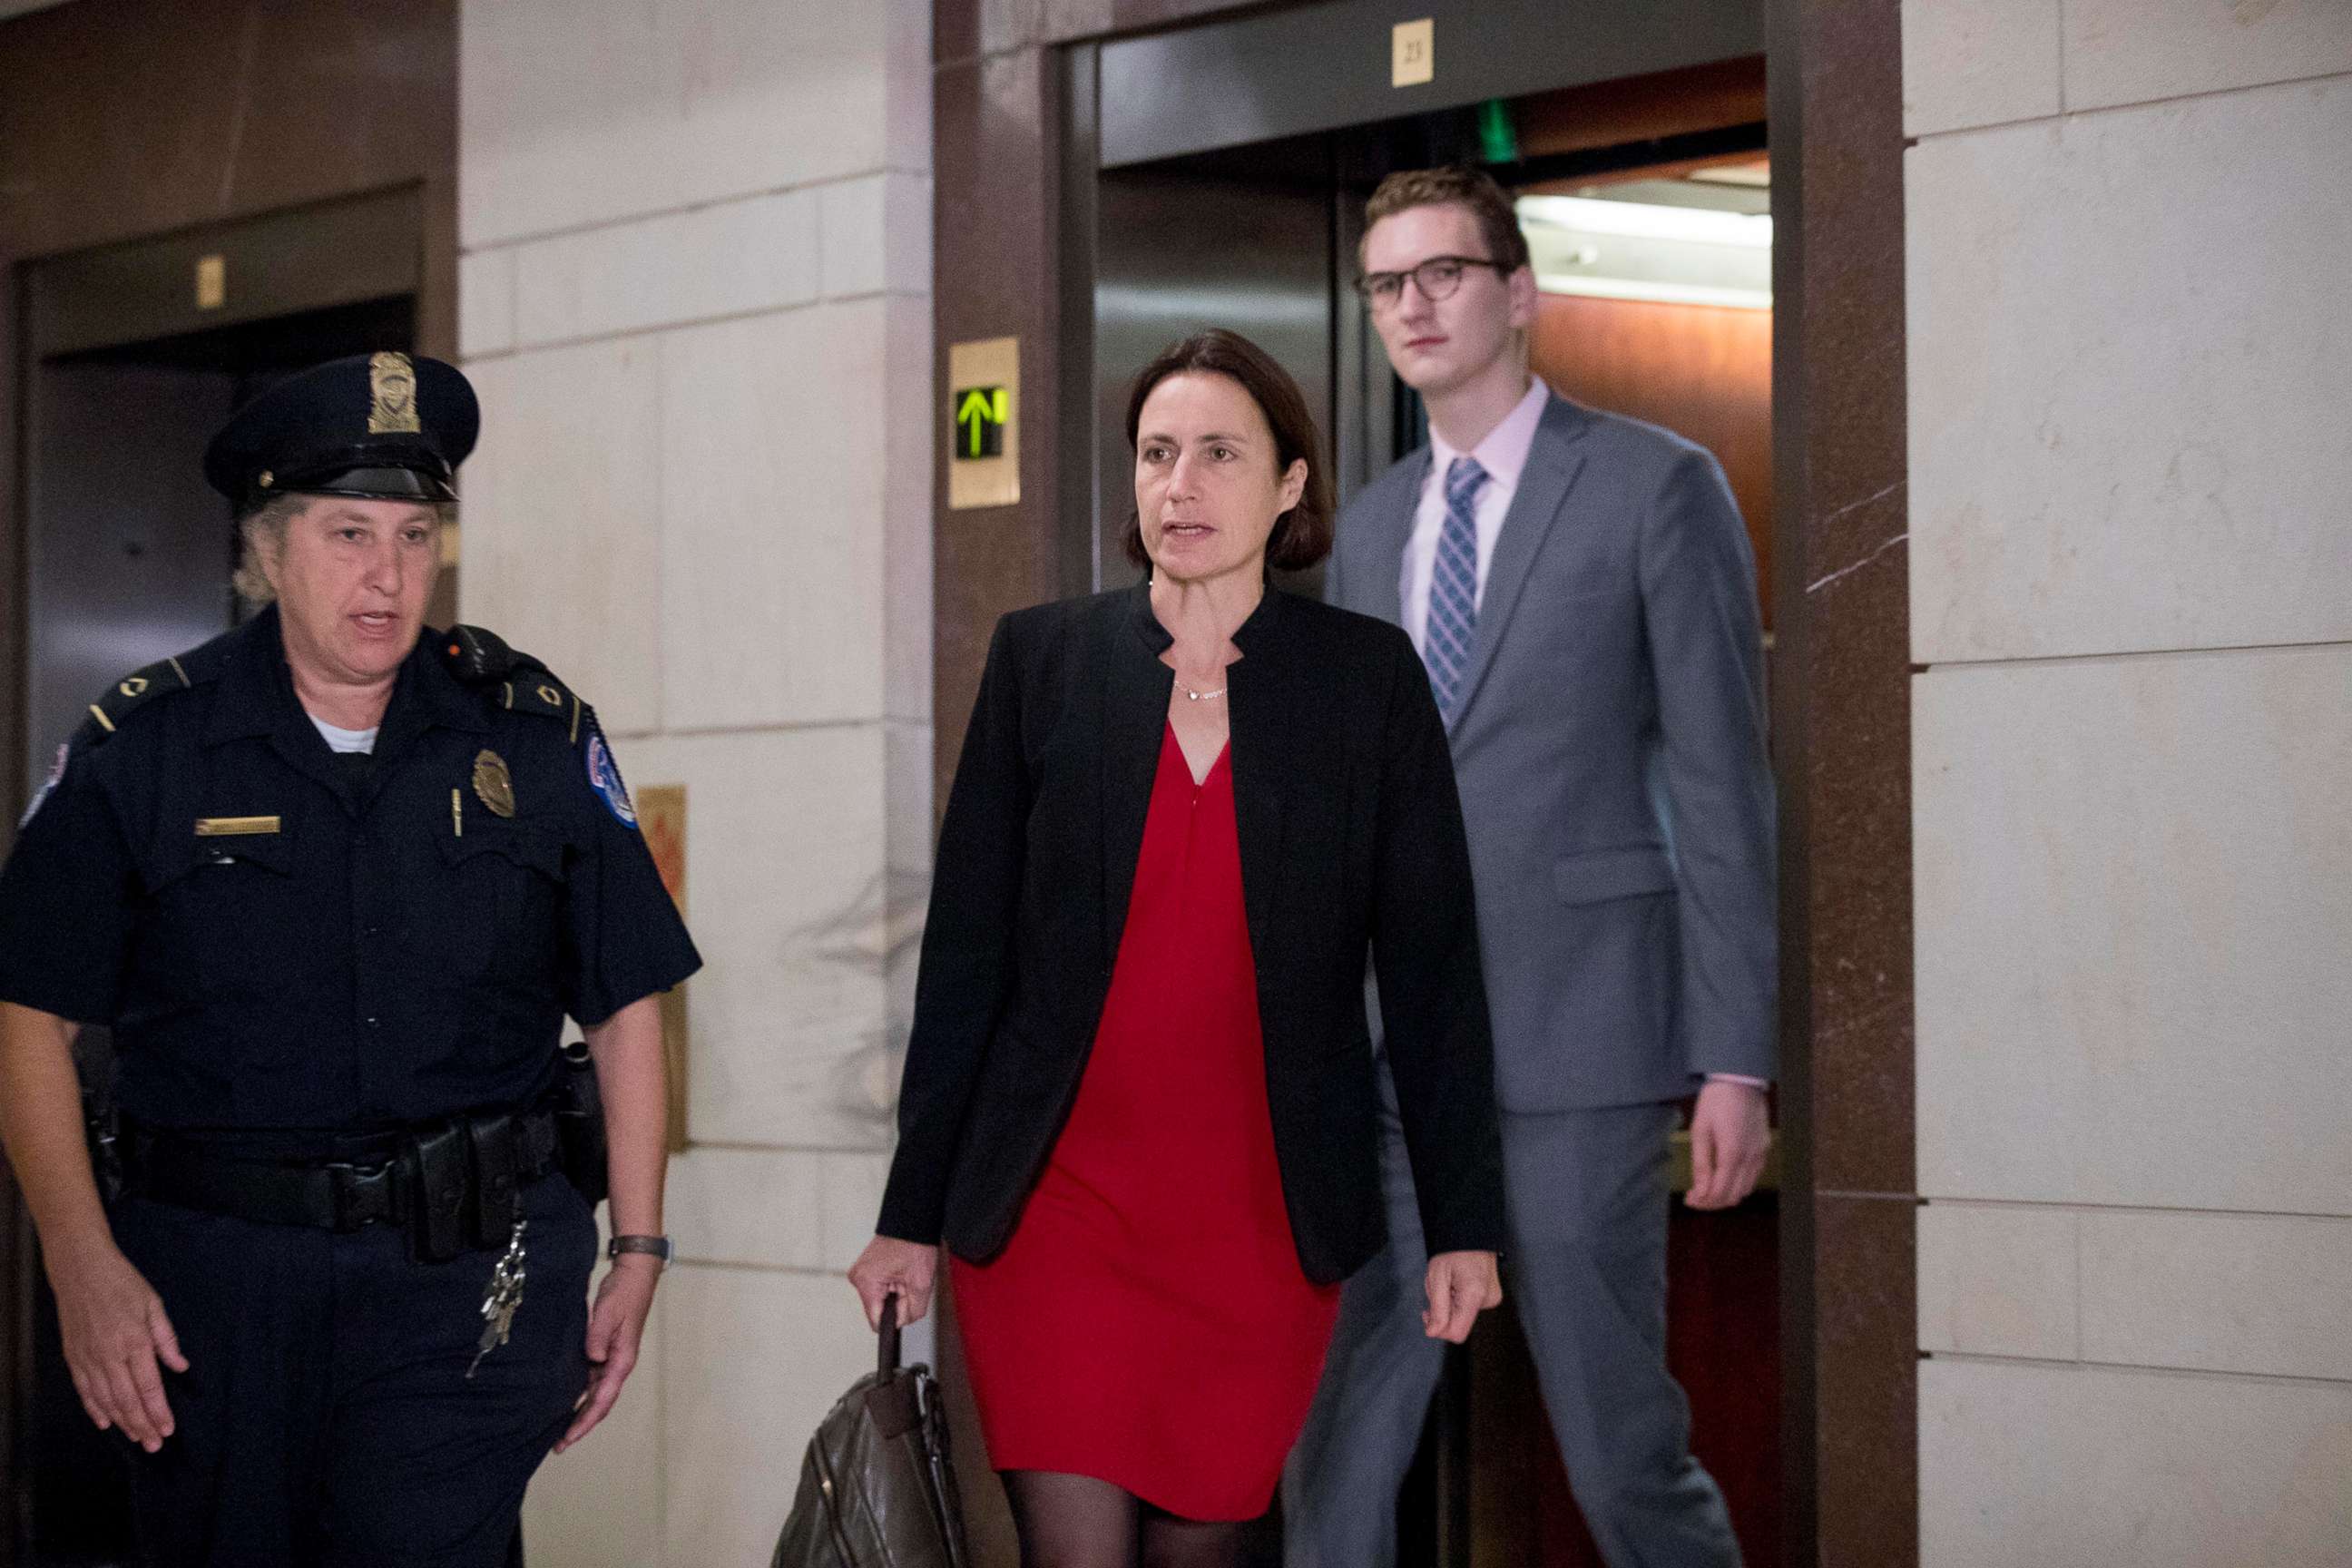 PHOTO: Former White House advisor on Russia, Fiona Hill, arrives on Capitol Hill, Oct. 14, 2019, as she is scheduled to testify before congressional lawmakers as part of the House impeachment inquiry into President Donald Trump.  